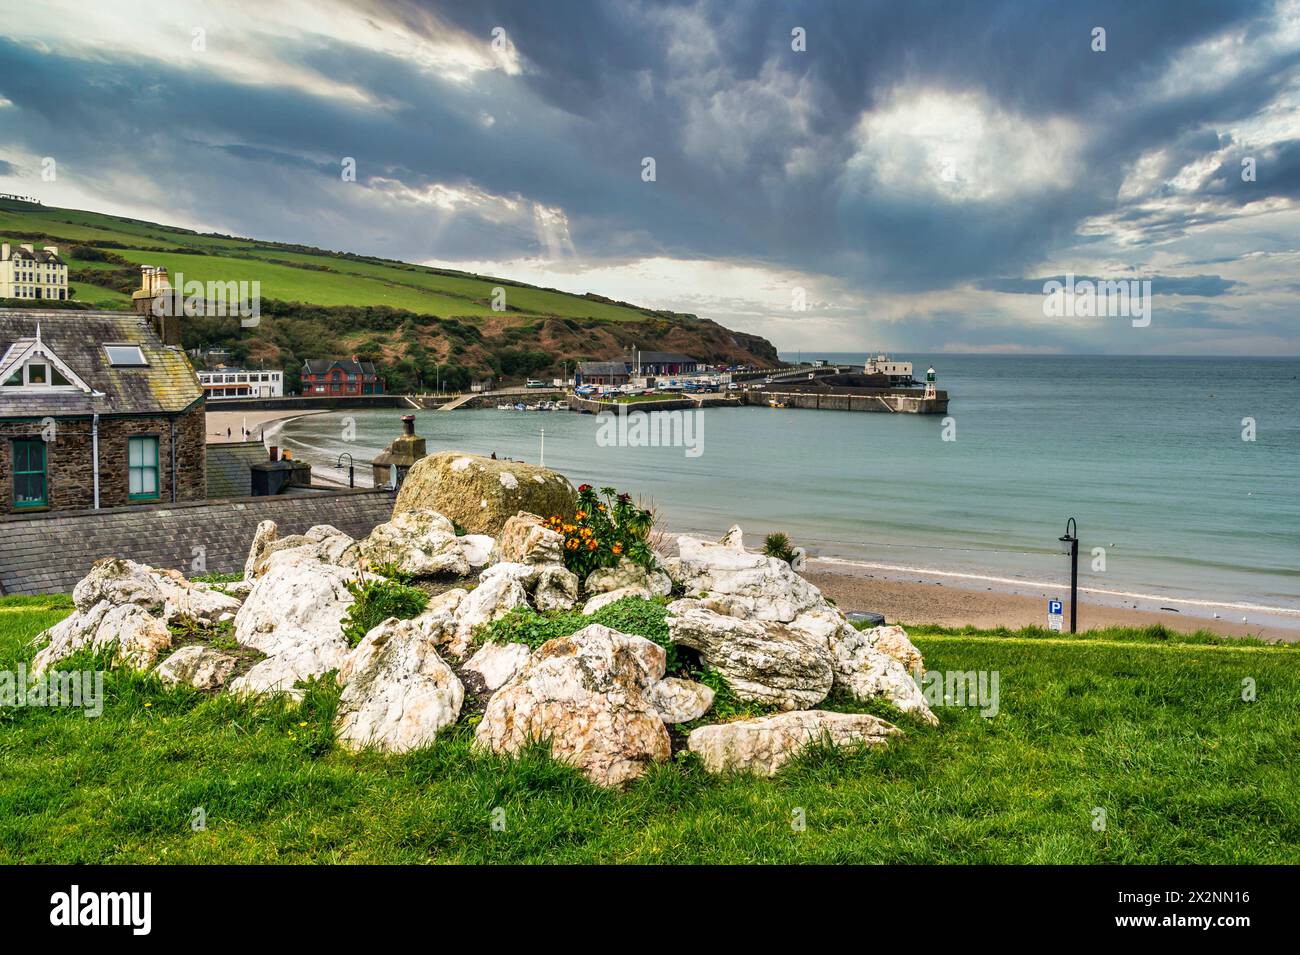 Scenic image looking across the bay towards the Raclan Pier and the Irish Sea at the coastal resort town of Port Erin on the Isle of Man Stock Photo